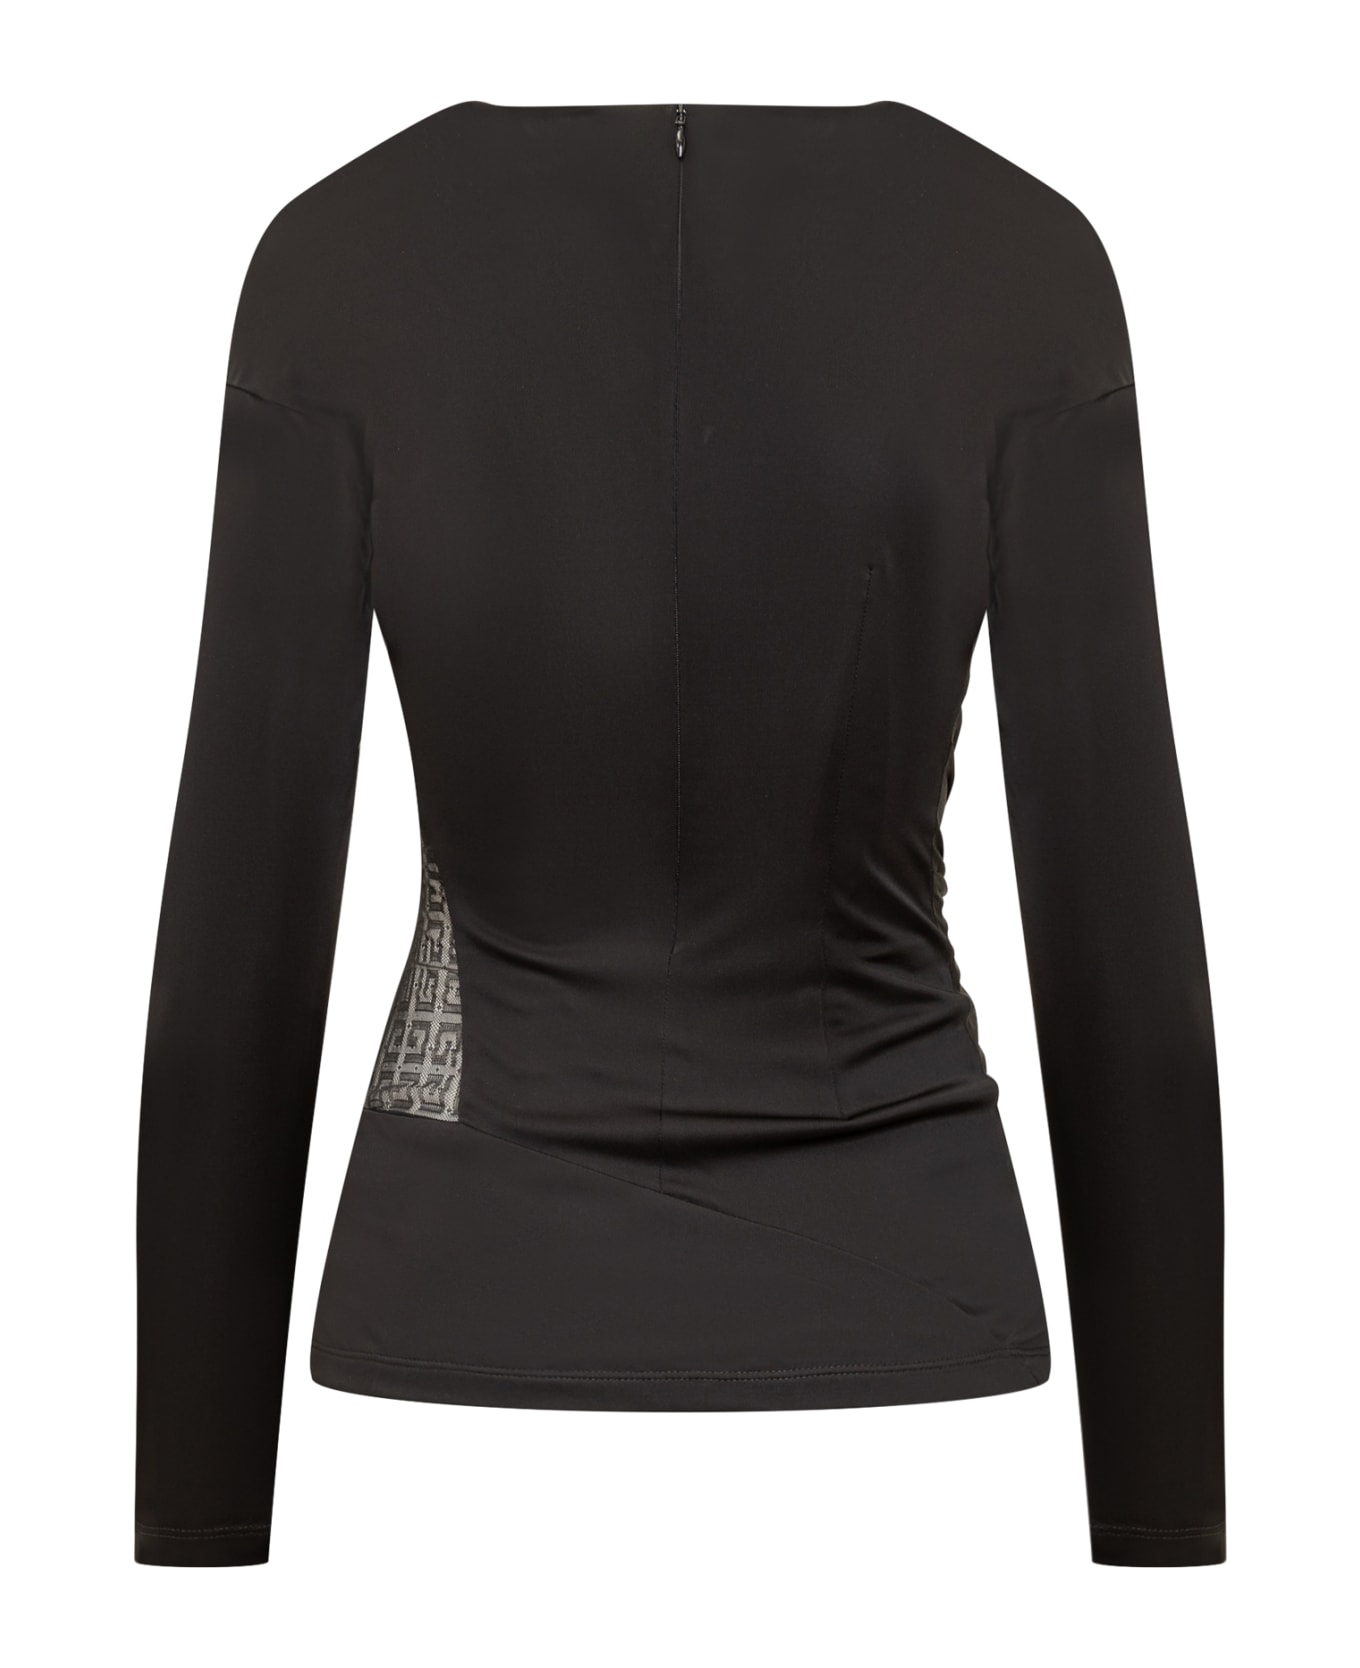 Givenchy Draped Jersey And Lace Top - BLACK